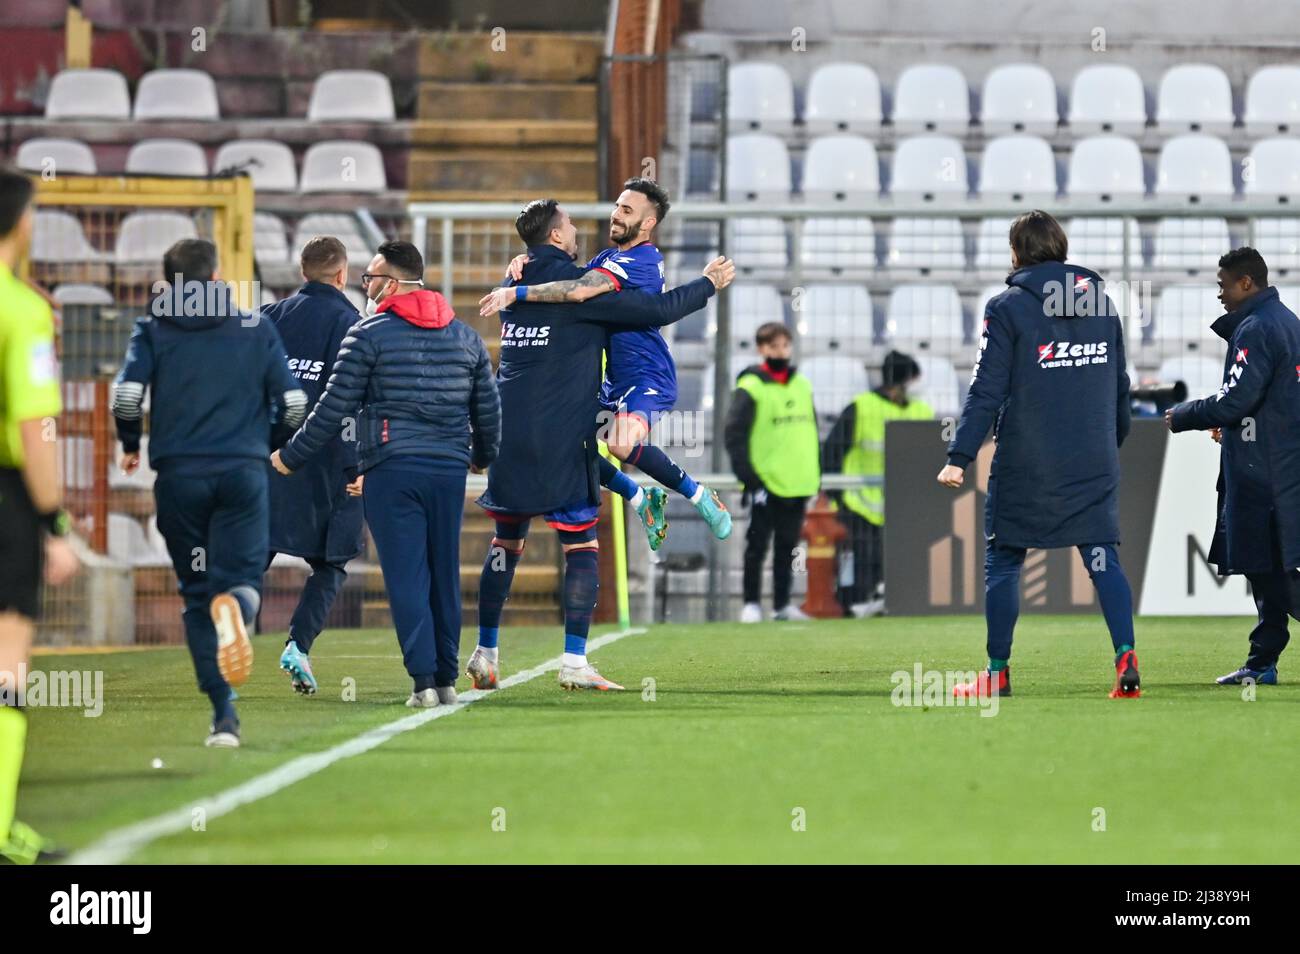 Vicenza, Italy. 06th Apr, 2022. Manuel Marras (FC Crotone) celebrates after  scoring a goal 1-1 during LR Vicenza vs FC Crotone, Italian soccer Serie B  match in Vicenza, Italy, April 06 2022